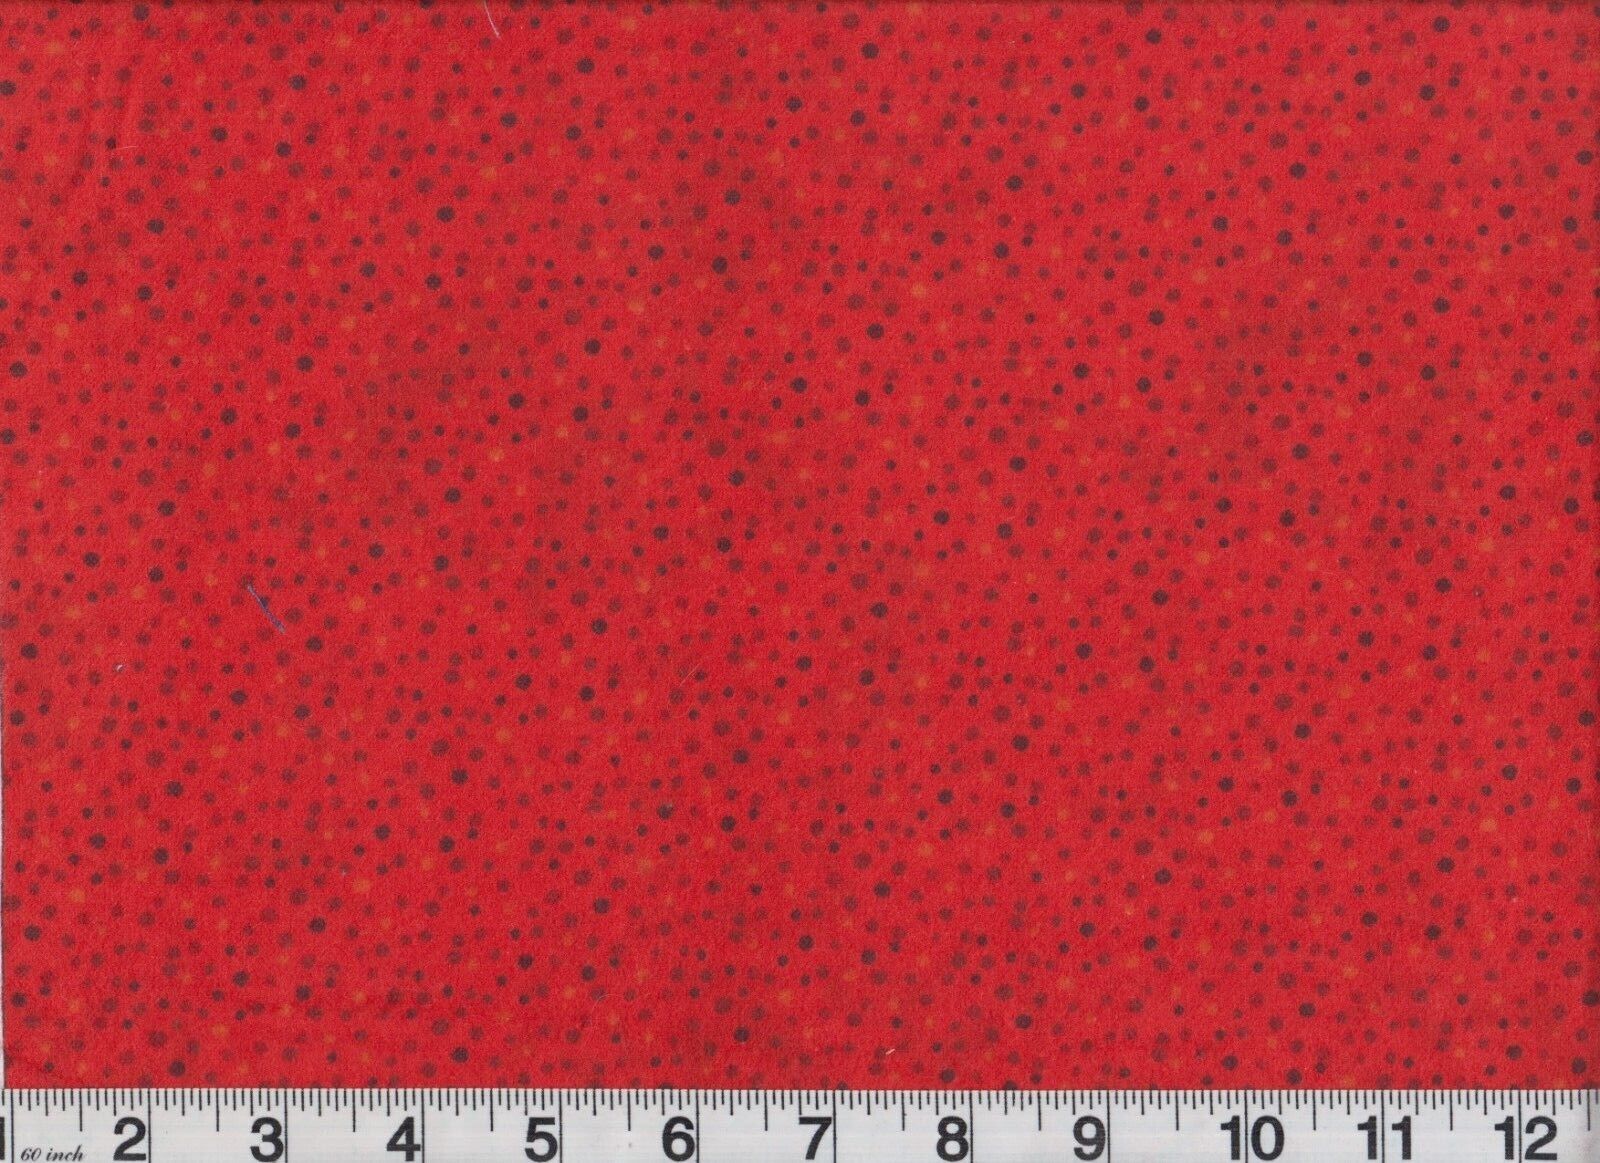 Essentials Flannel Fabric Polka Dots on Red OOP Premium Cotton